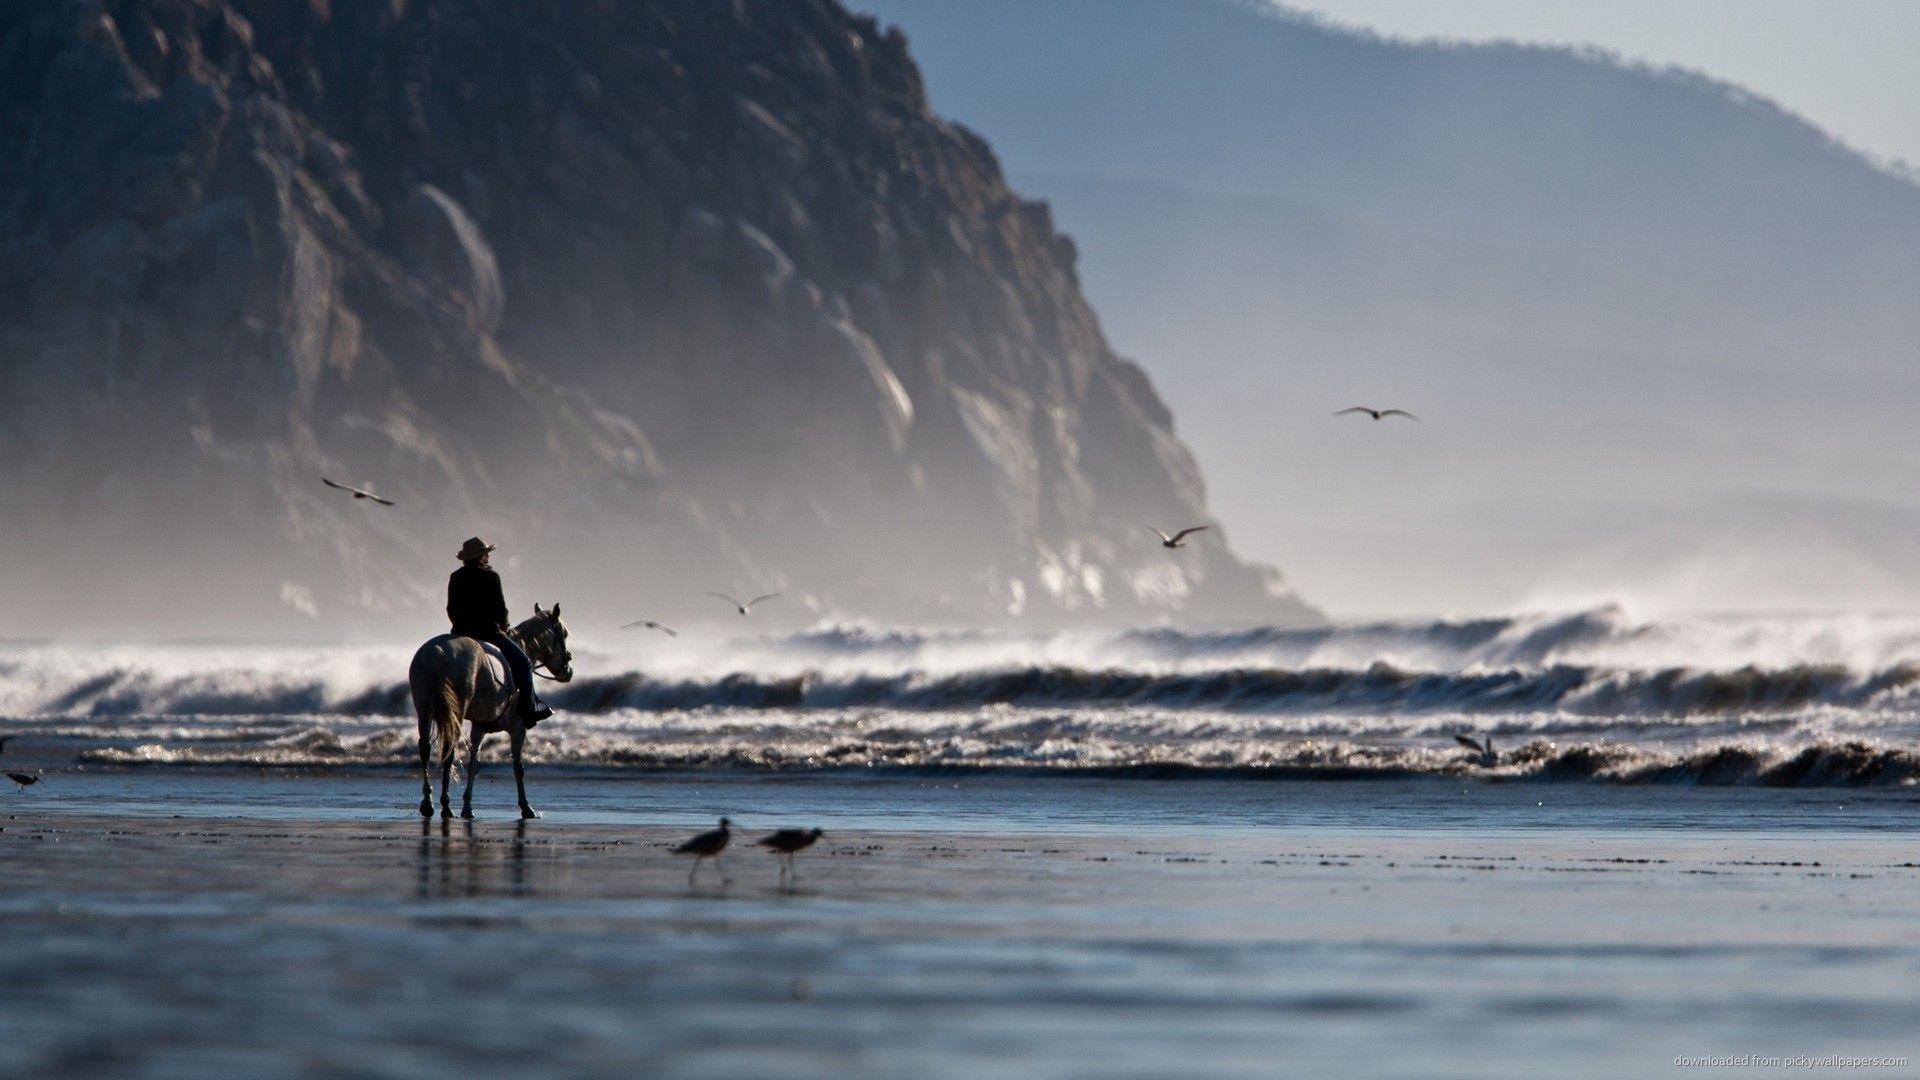 Riding The Horse On The Shore Wallpaper For Samsung Galaxy Tab